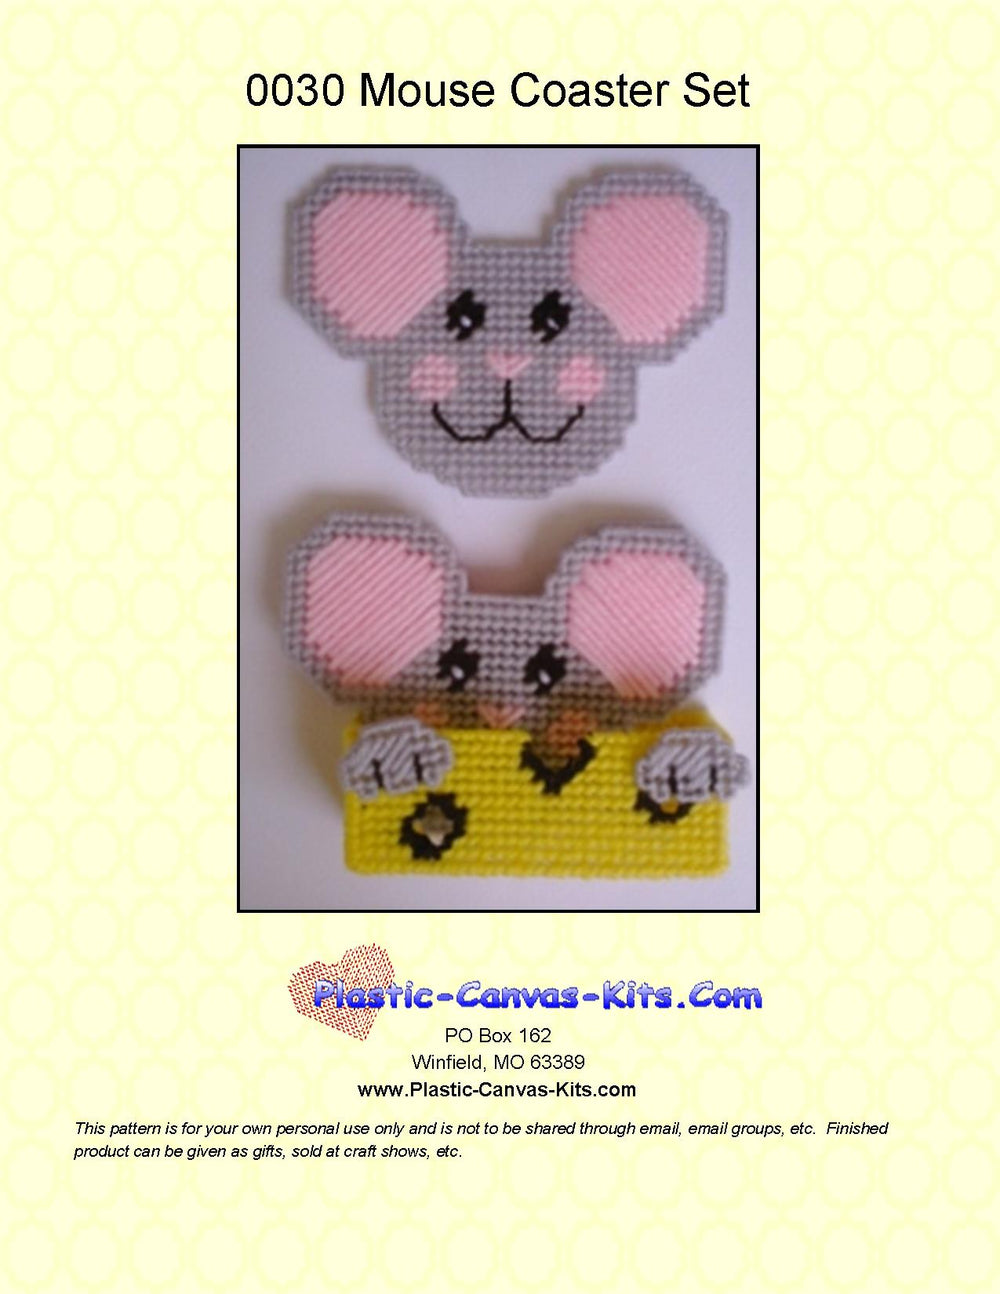 Mouse and Cheese Coaster Set